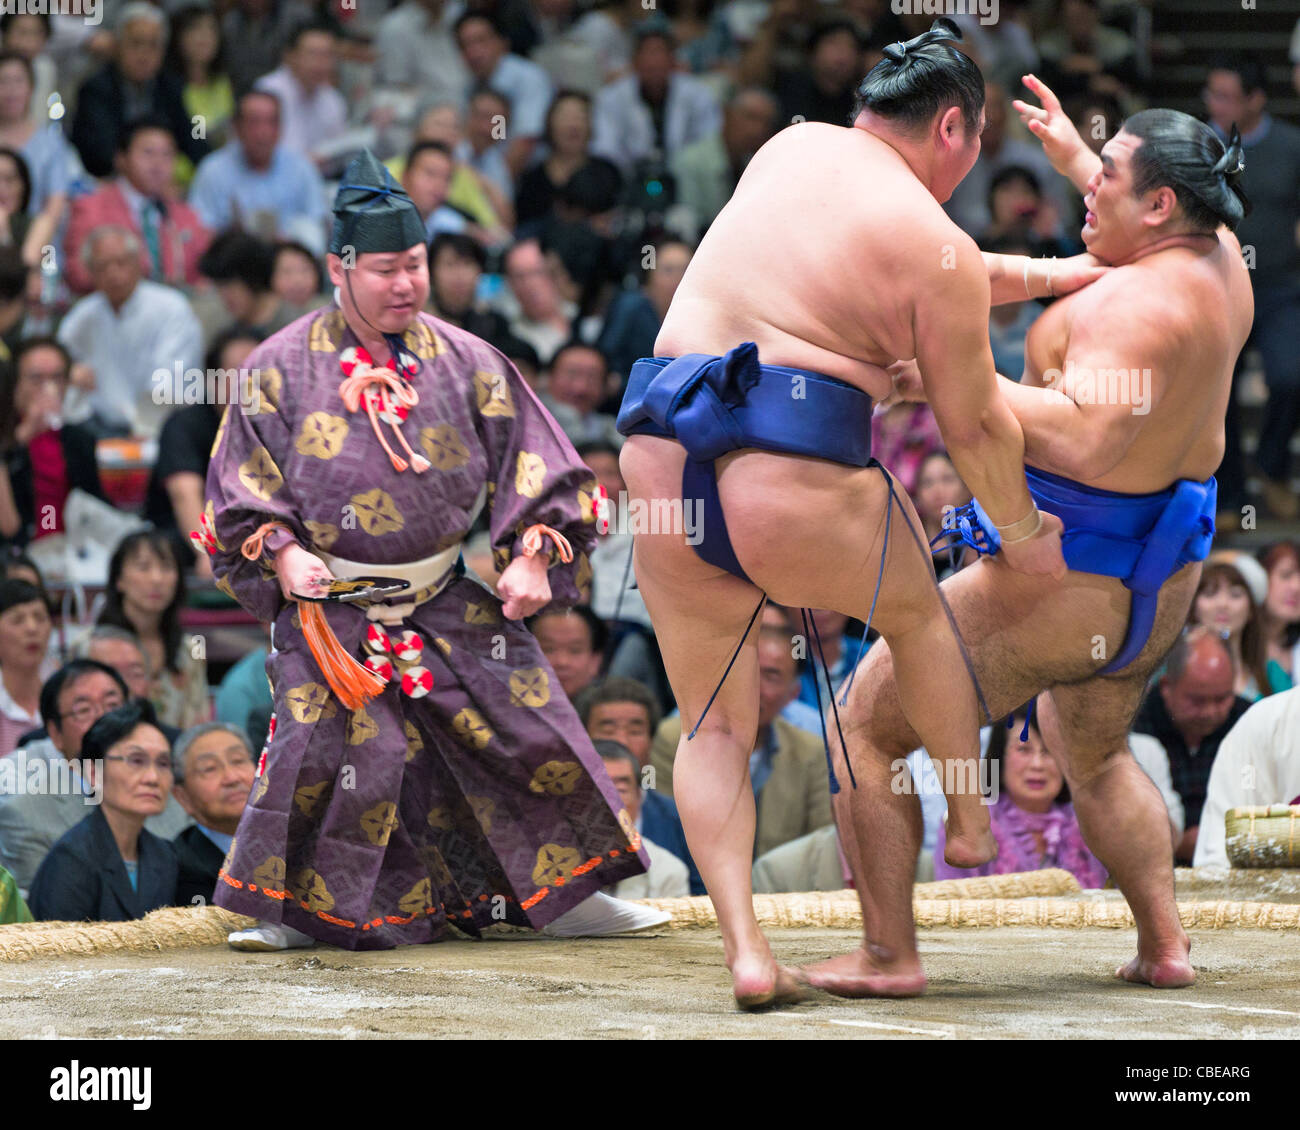 A Referee watches two sumo wrestlers compete in the Tokyo Grand Sumo Tournament, Tokyo, Japan Stock Photo